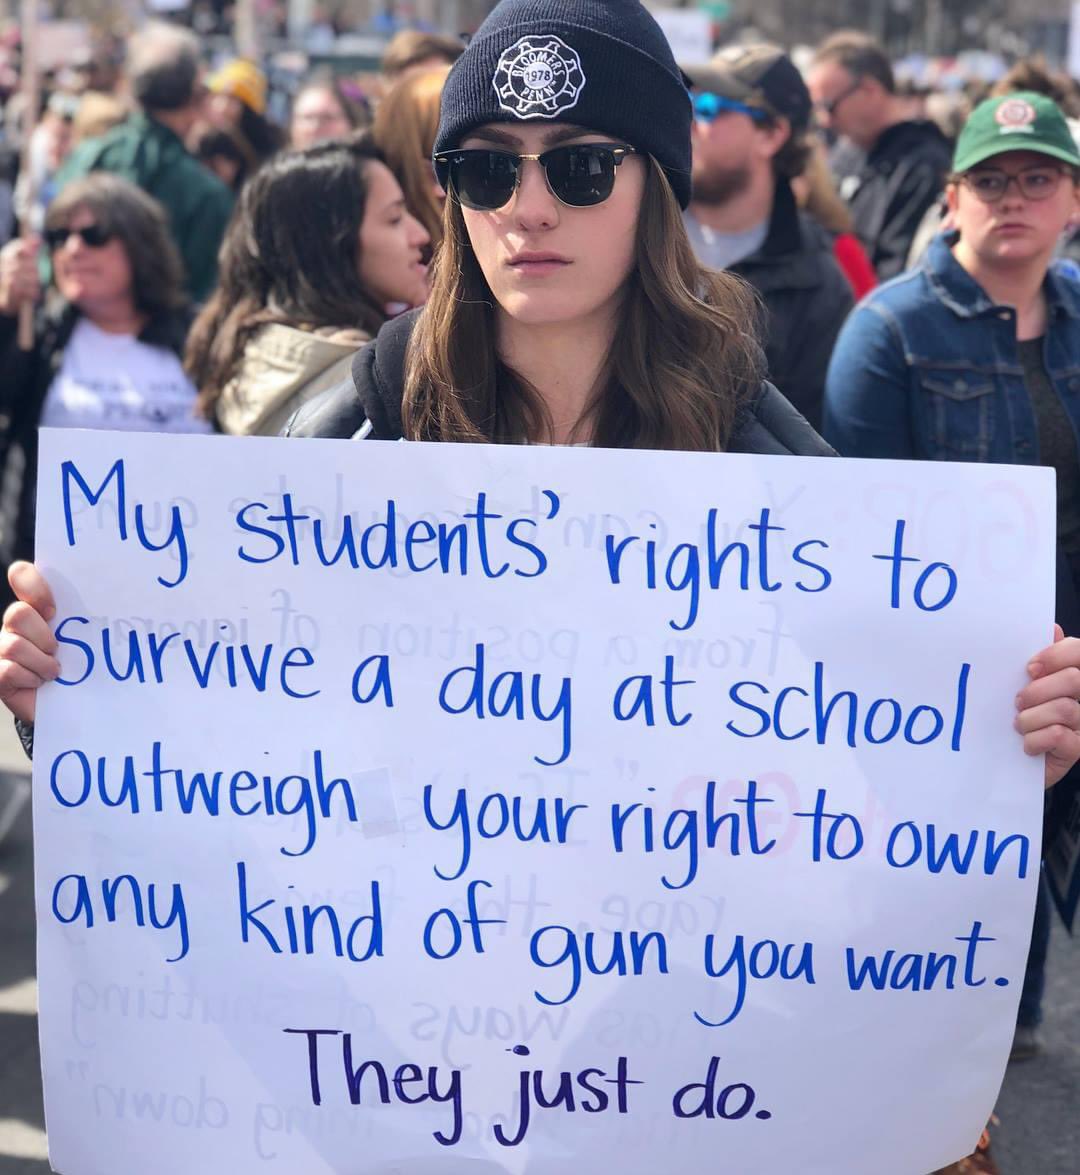 The Parkland school shooting happened two months after I’d locked myself in my own classroom during an active shooter threat. It’s the reason I left teaching for politics, and it’s the reason I’m still here. Six years since the March for Our Lives, and we will keep fighting.